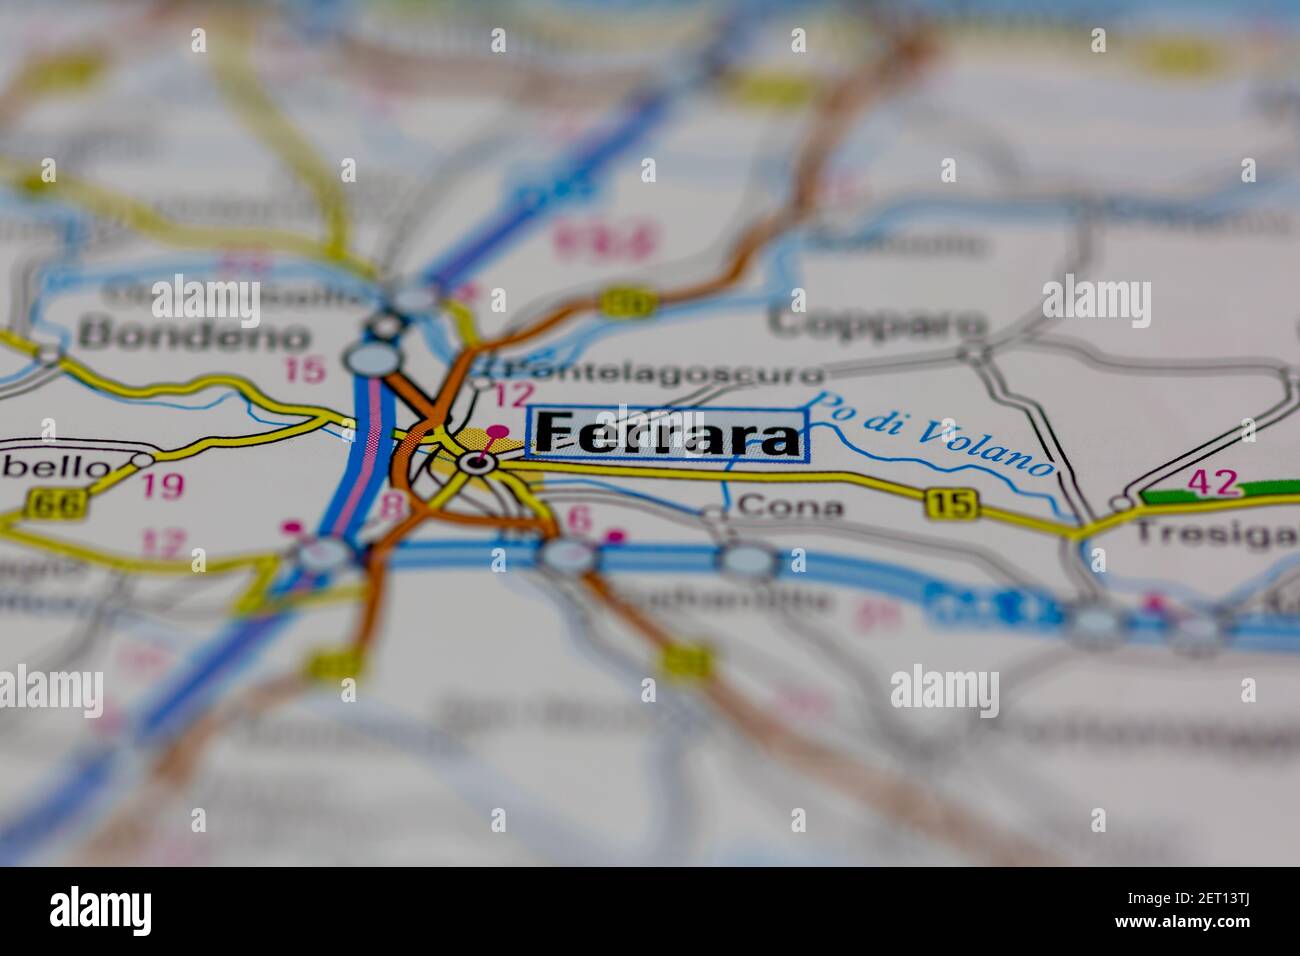 Ferrara Shown on a road map or Geography map Stock Photo